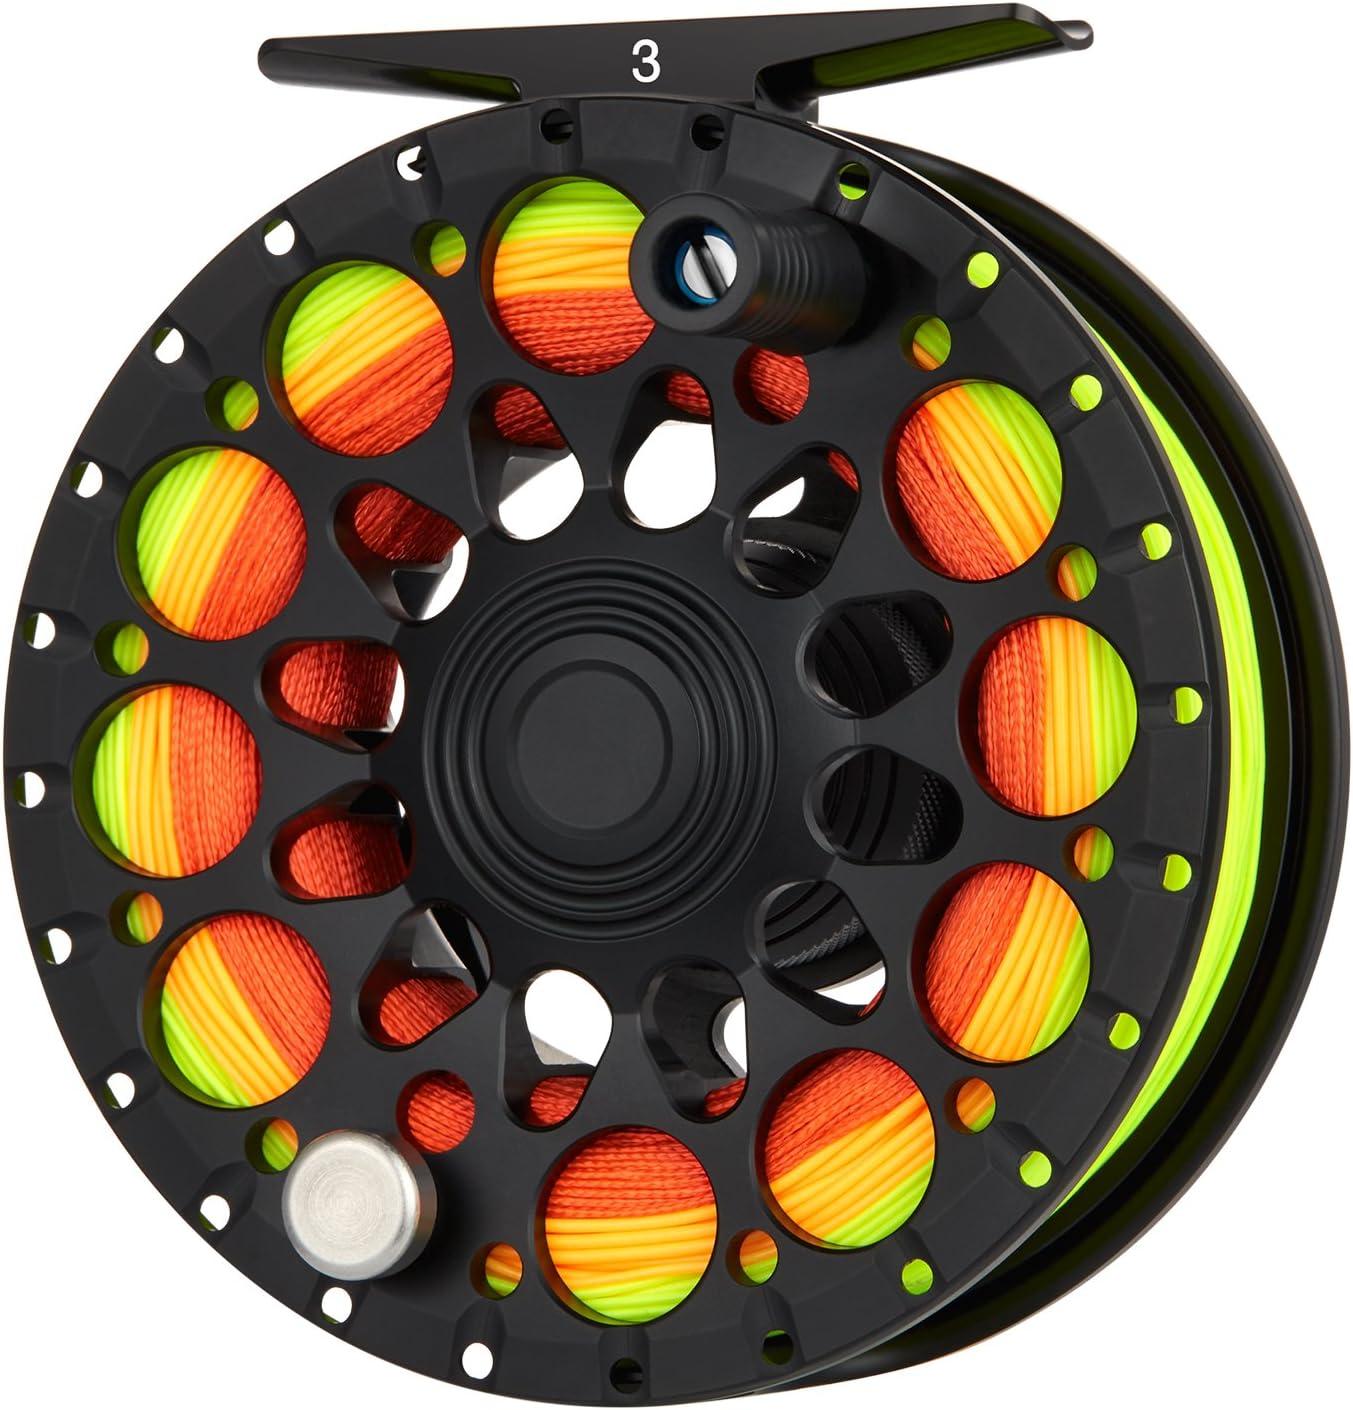 Piscifun Crest Fly Fishing Reel Fully Sealed Drag Large Arbor Fly Reel  Saltwater CNC-machined Aluminum Alloy Fly Reel 5/6 Black, Reels -   Canada